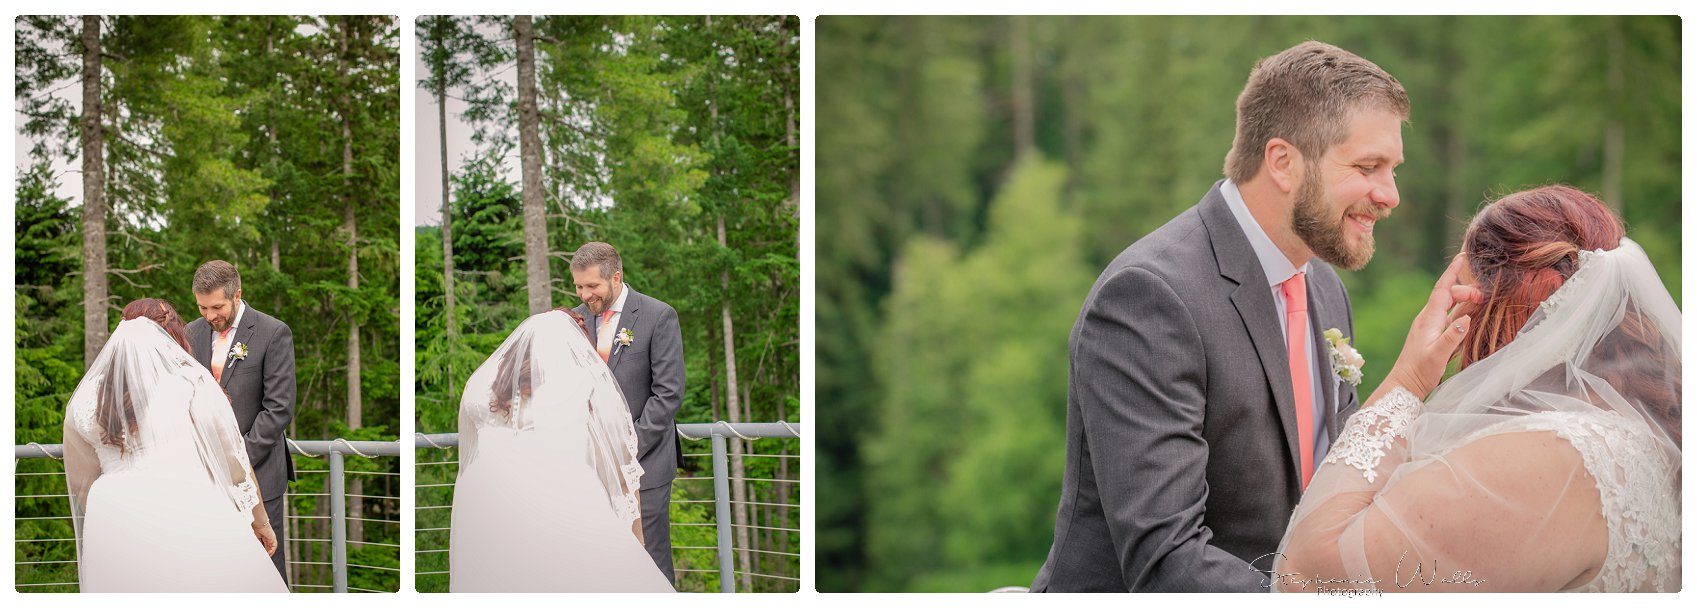 1st look Bridals 023 Gold Mountain Golf Course Wedding With Jenn and Rob